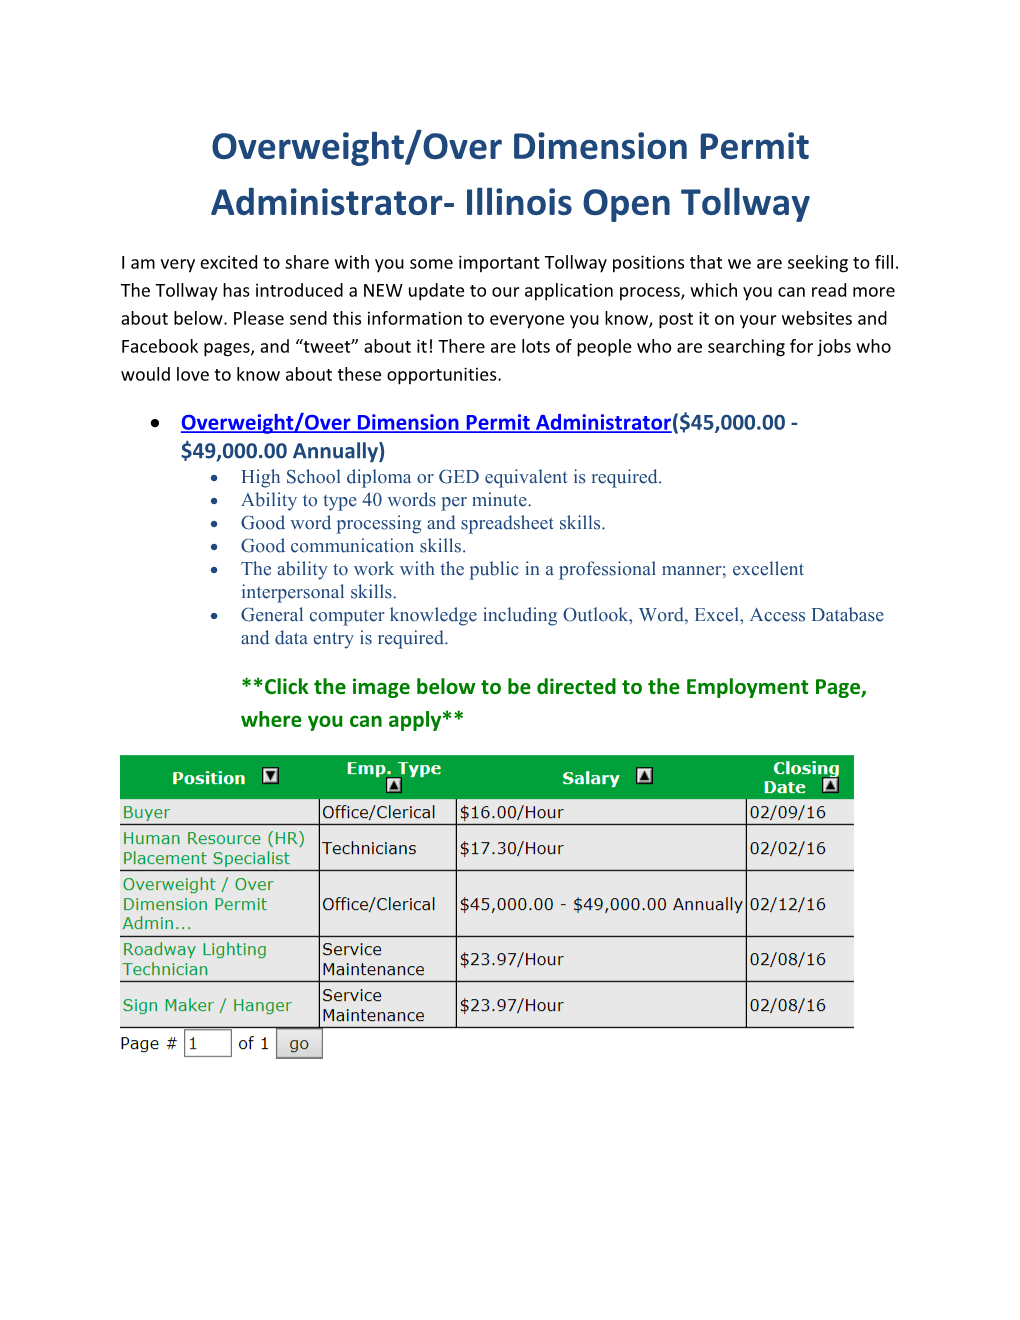 Overweight/Over Dimension Permit Administrator- Illinois Open Tollway